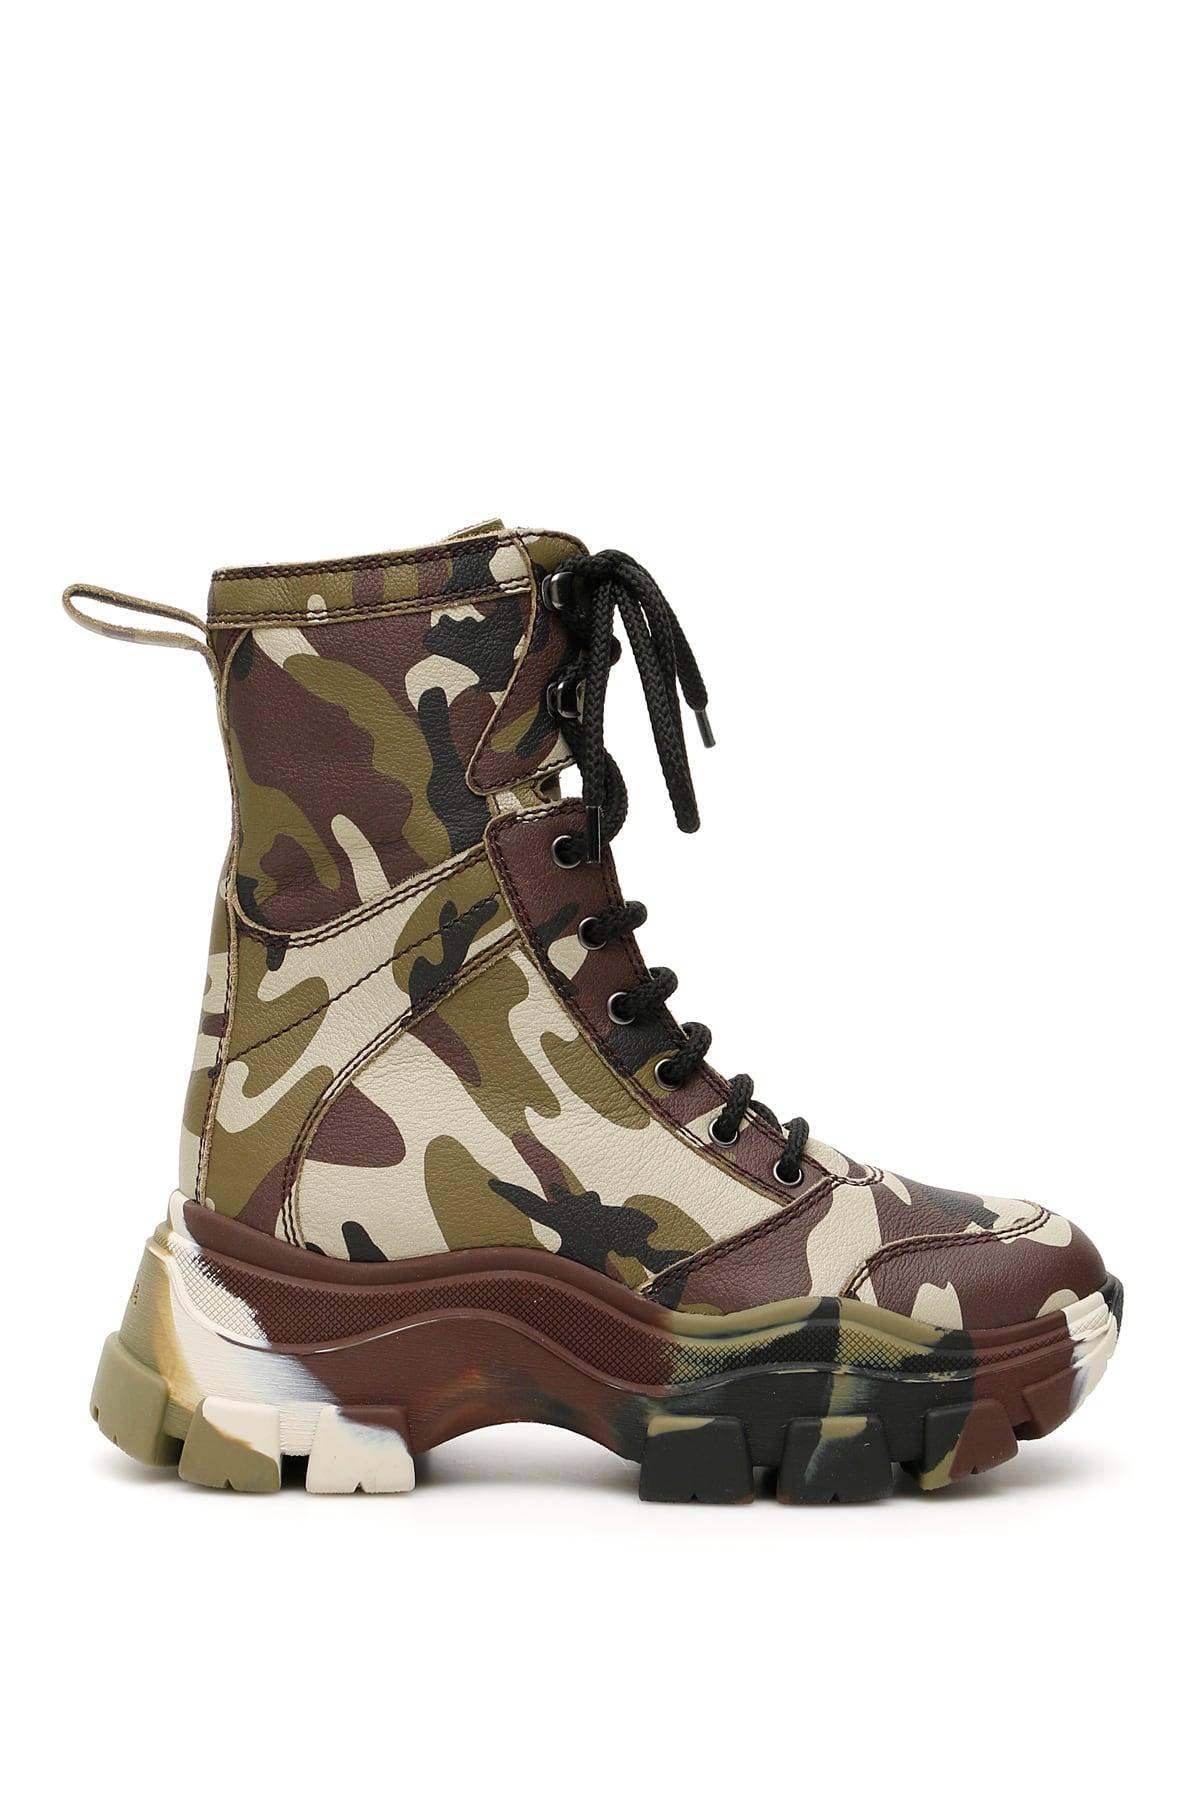 Stealthy Boots: Prada Camouflage Boots